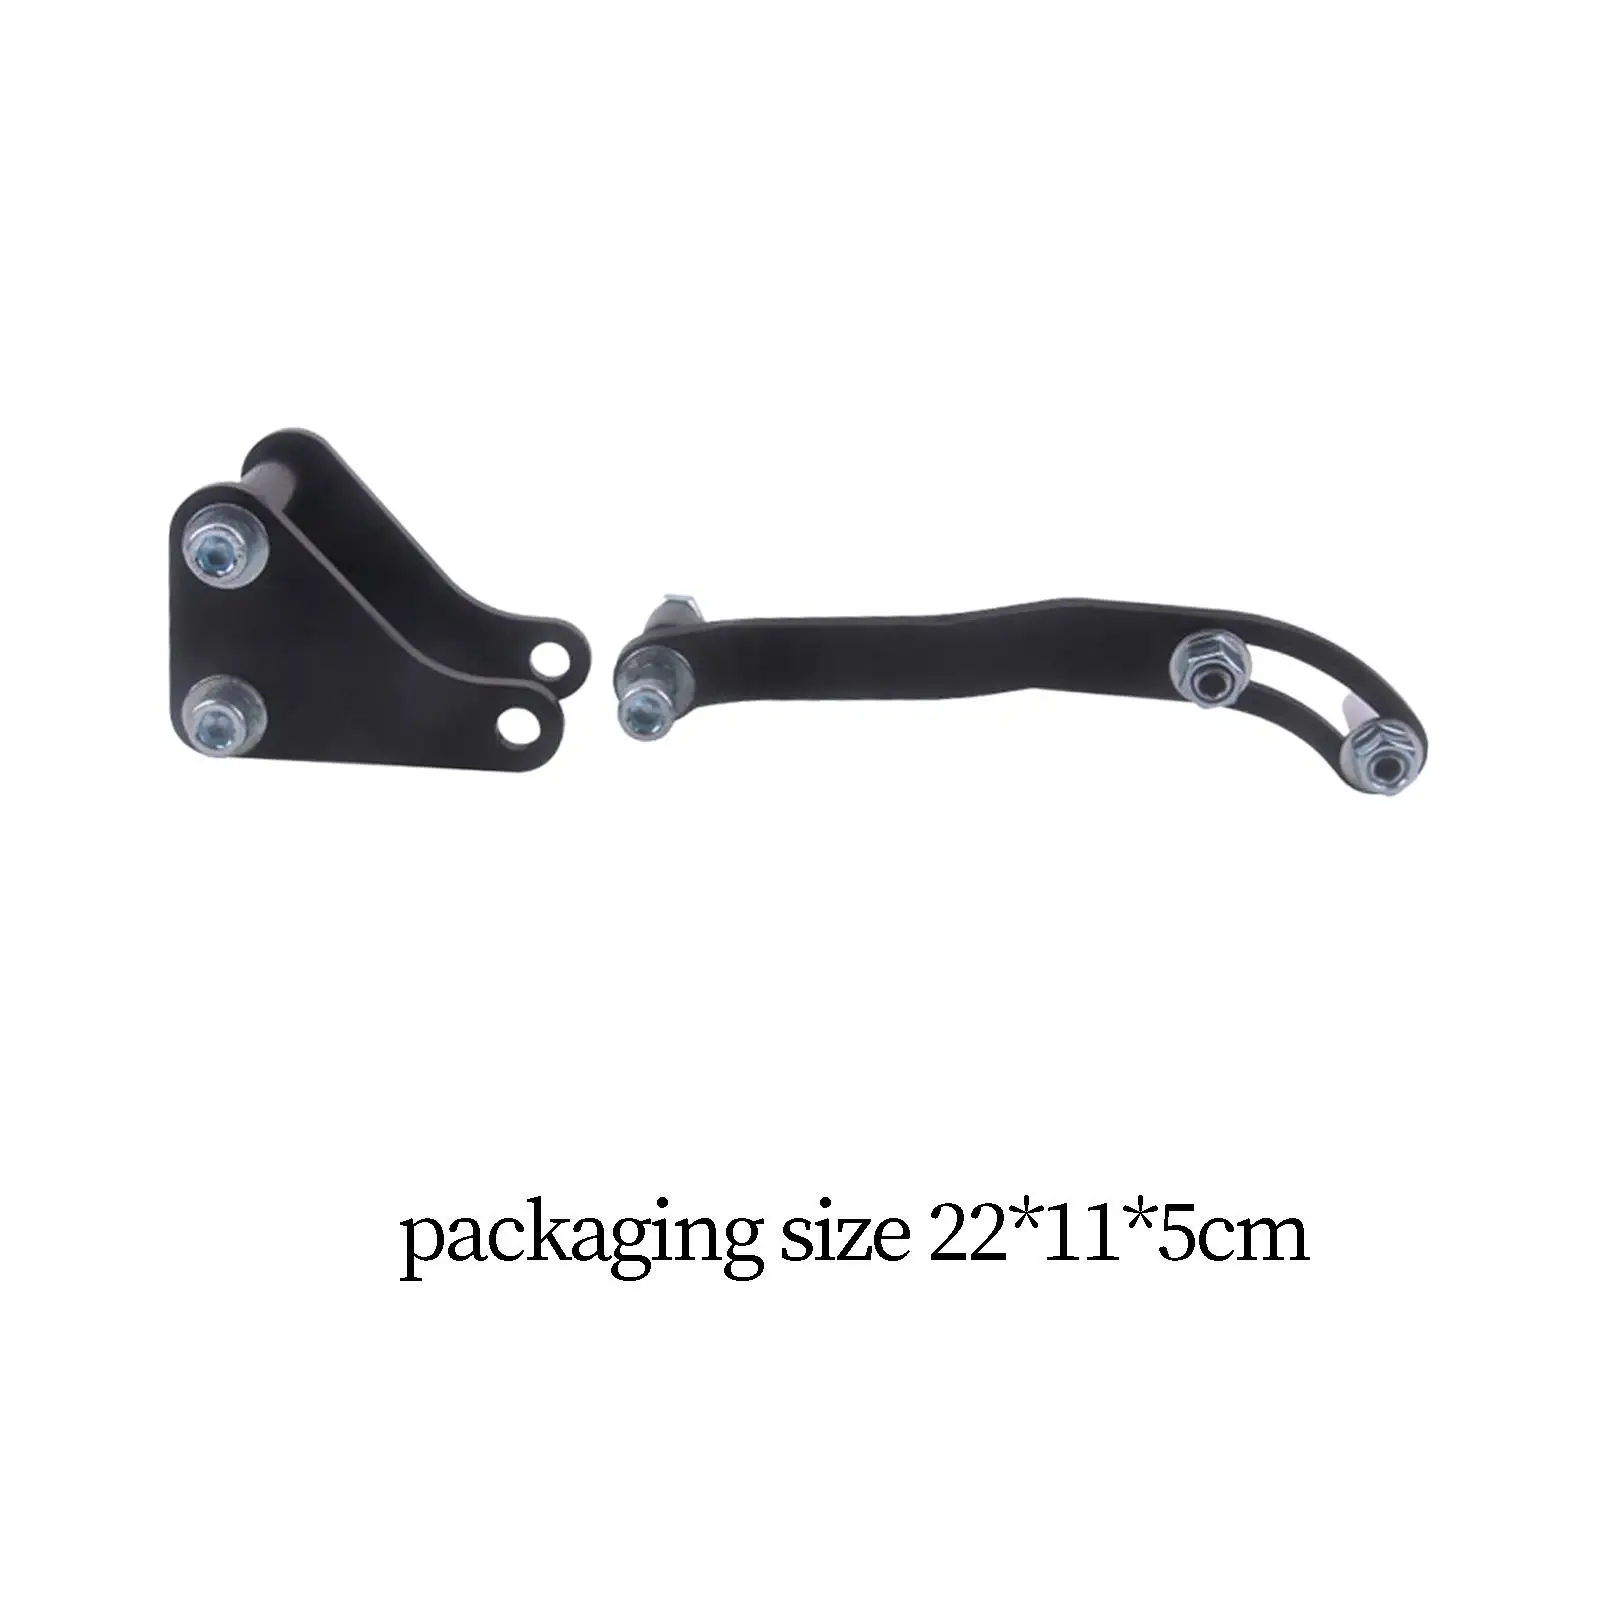 Black Power Steering Pump Mounting Bracket Durable Spare Parts Professional Replaces for Chevy Sbc Engine 327 383 350 305